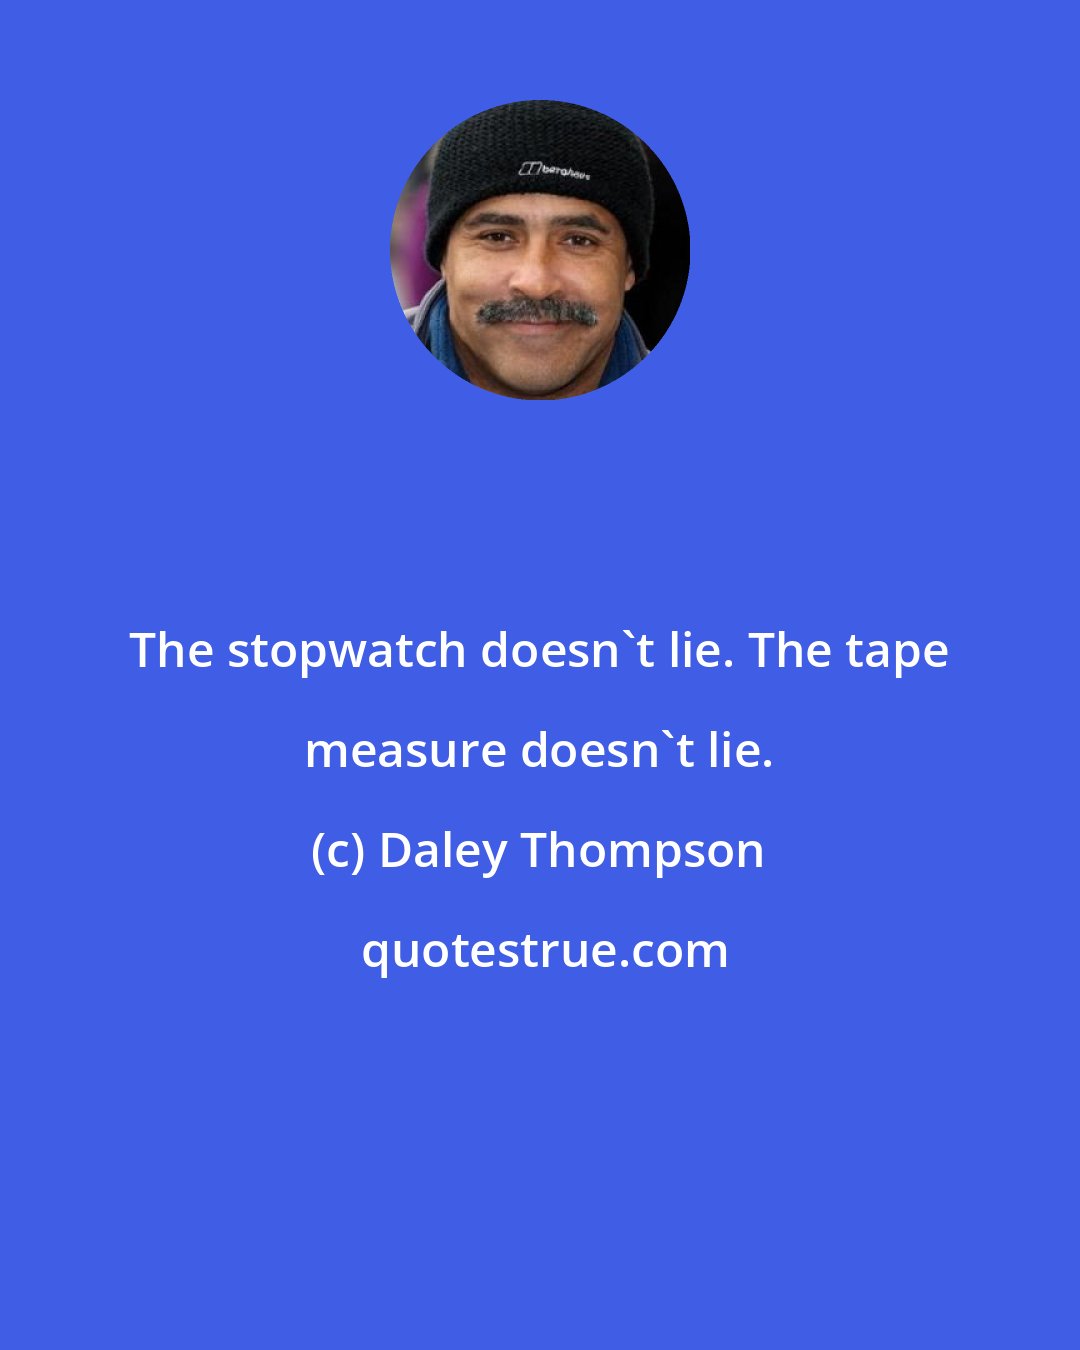 Daley Thompson: The stopwatch doesn't lie. The tape measure doesn't lie.